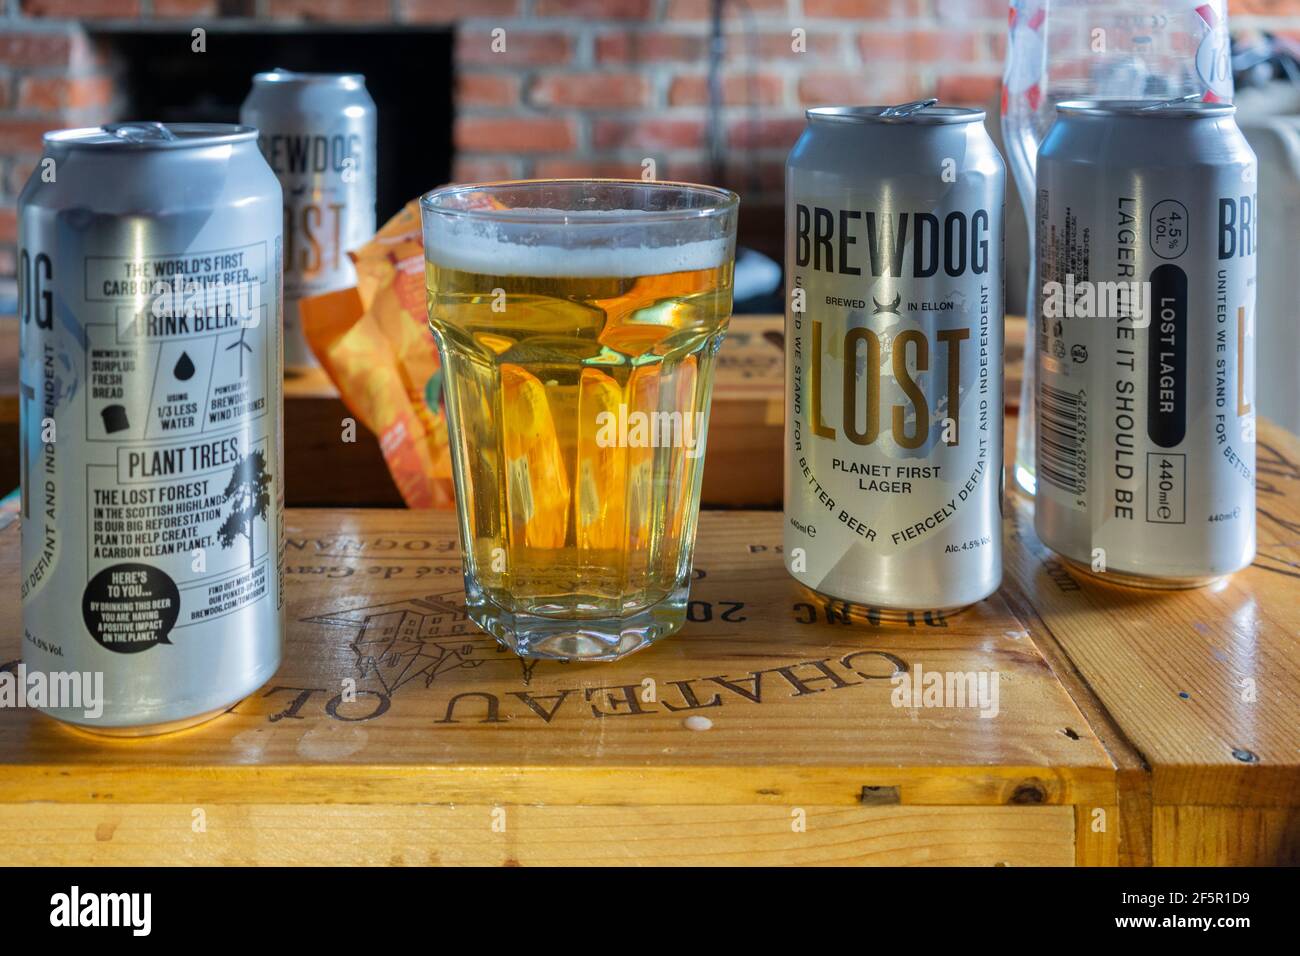 Cans and a glass of Brew Dog Lost Lager, a German style pilsner brewed using wind power and is the world's first carbon negative beer Stock Photo